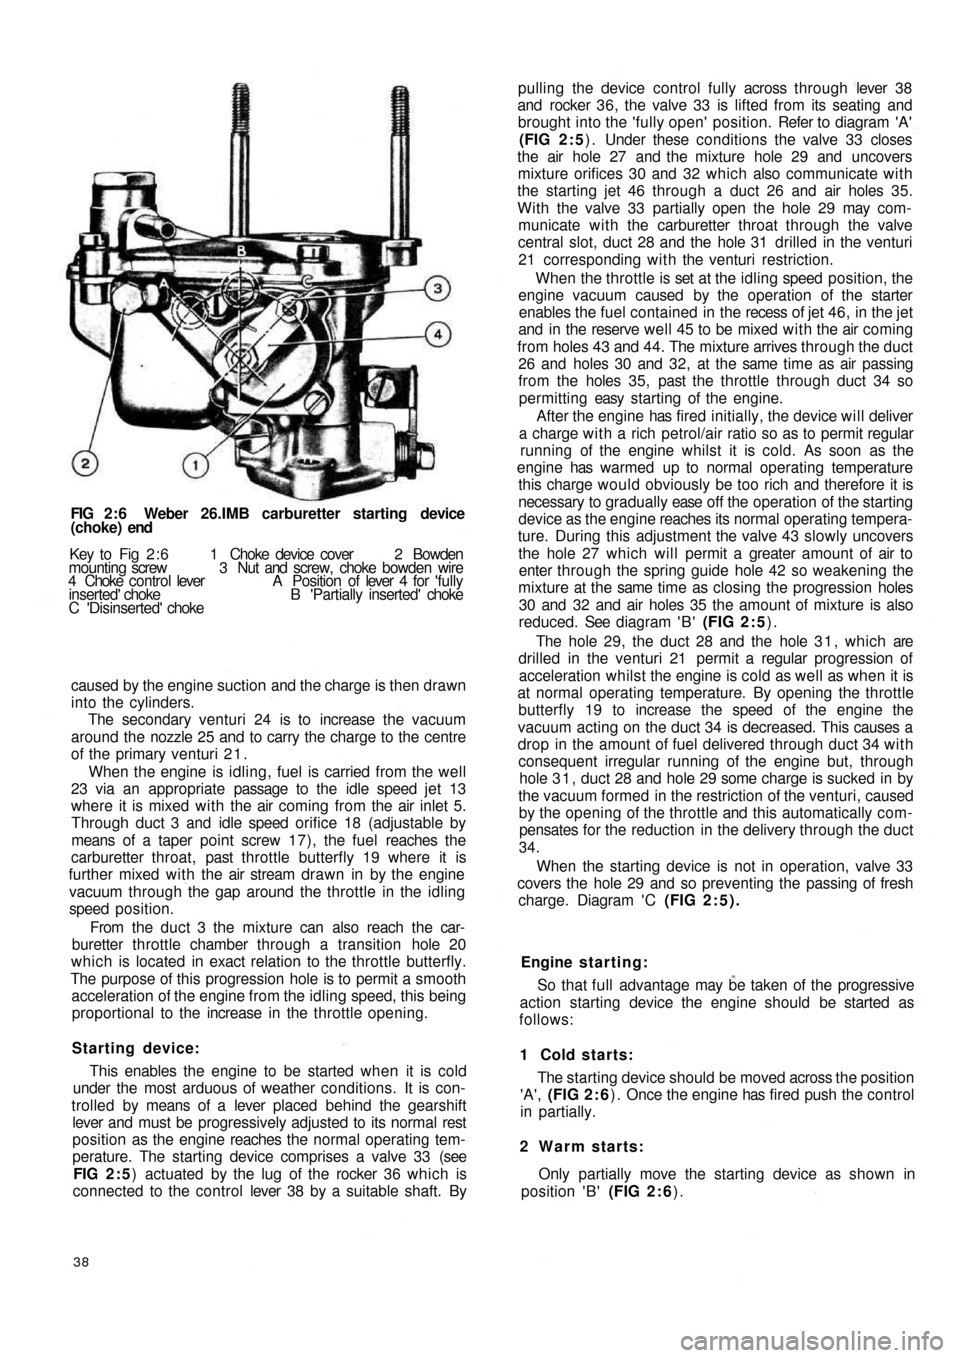 FIAT 500 1959 1.G Workshop Manual FIG 2 : 6  Weber 26.IMB carburetter starting device
(choke) end
Key  to   Fig   2 : 6   1   Choke  device  cover   2  Bowden
mounting screw  3  Nut and screw, choke bowden wire
4  Choke  control lever